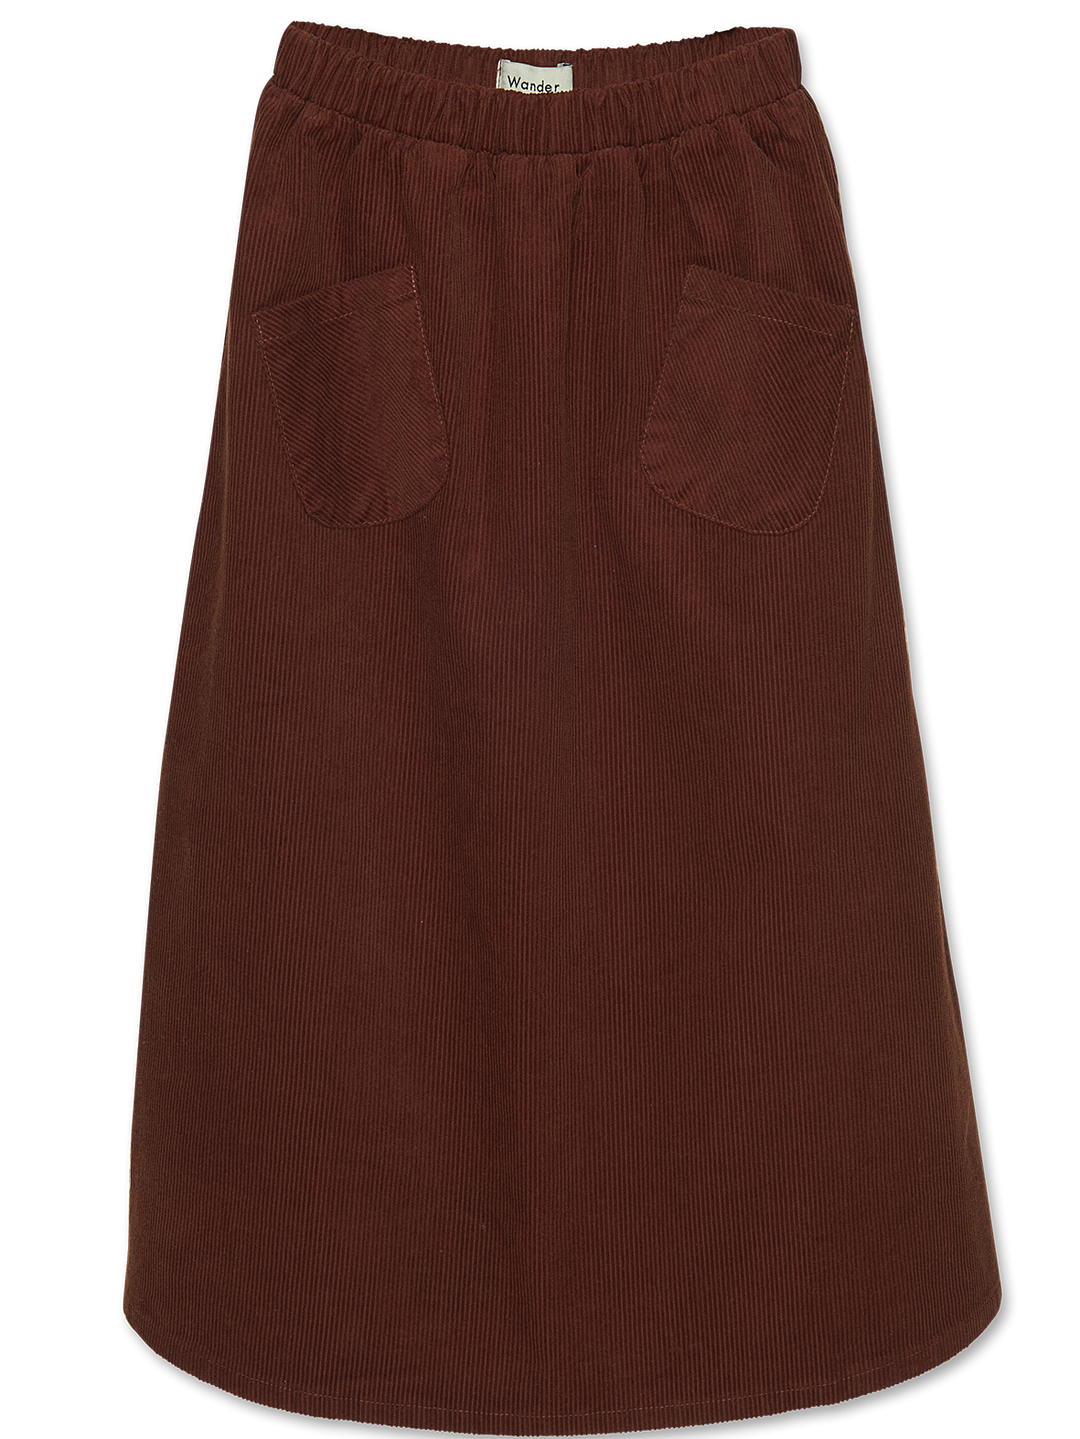 A-LINE SKIRT-Copper Cord